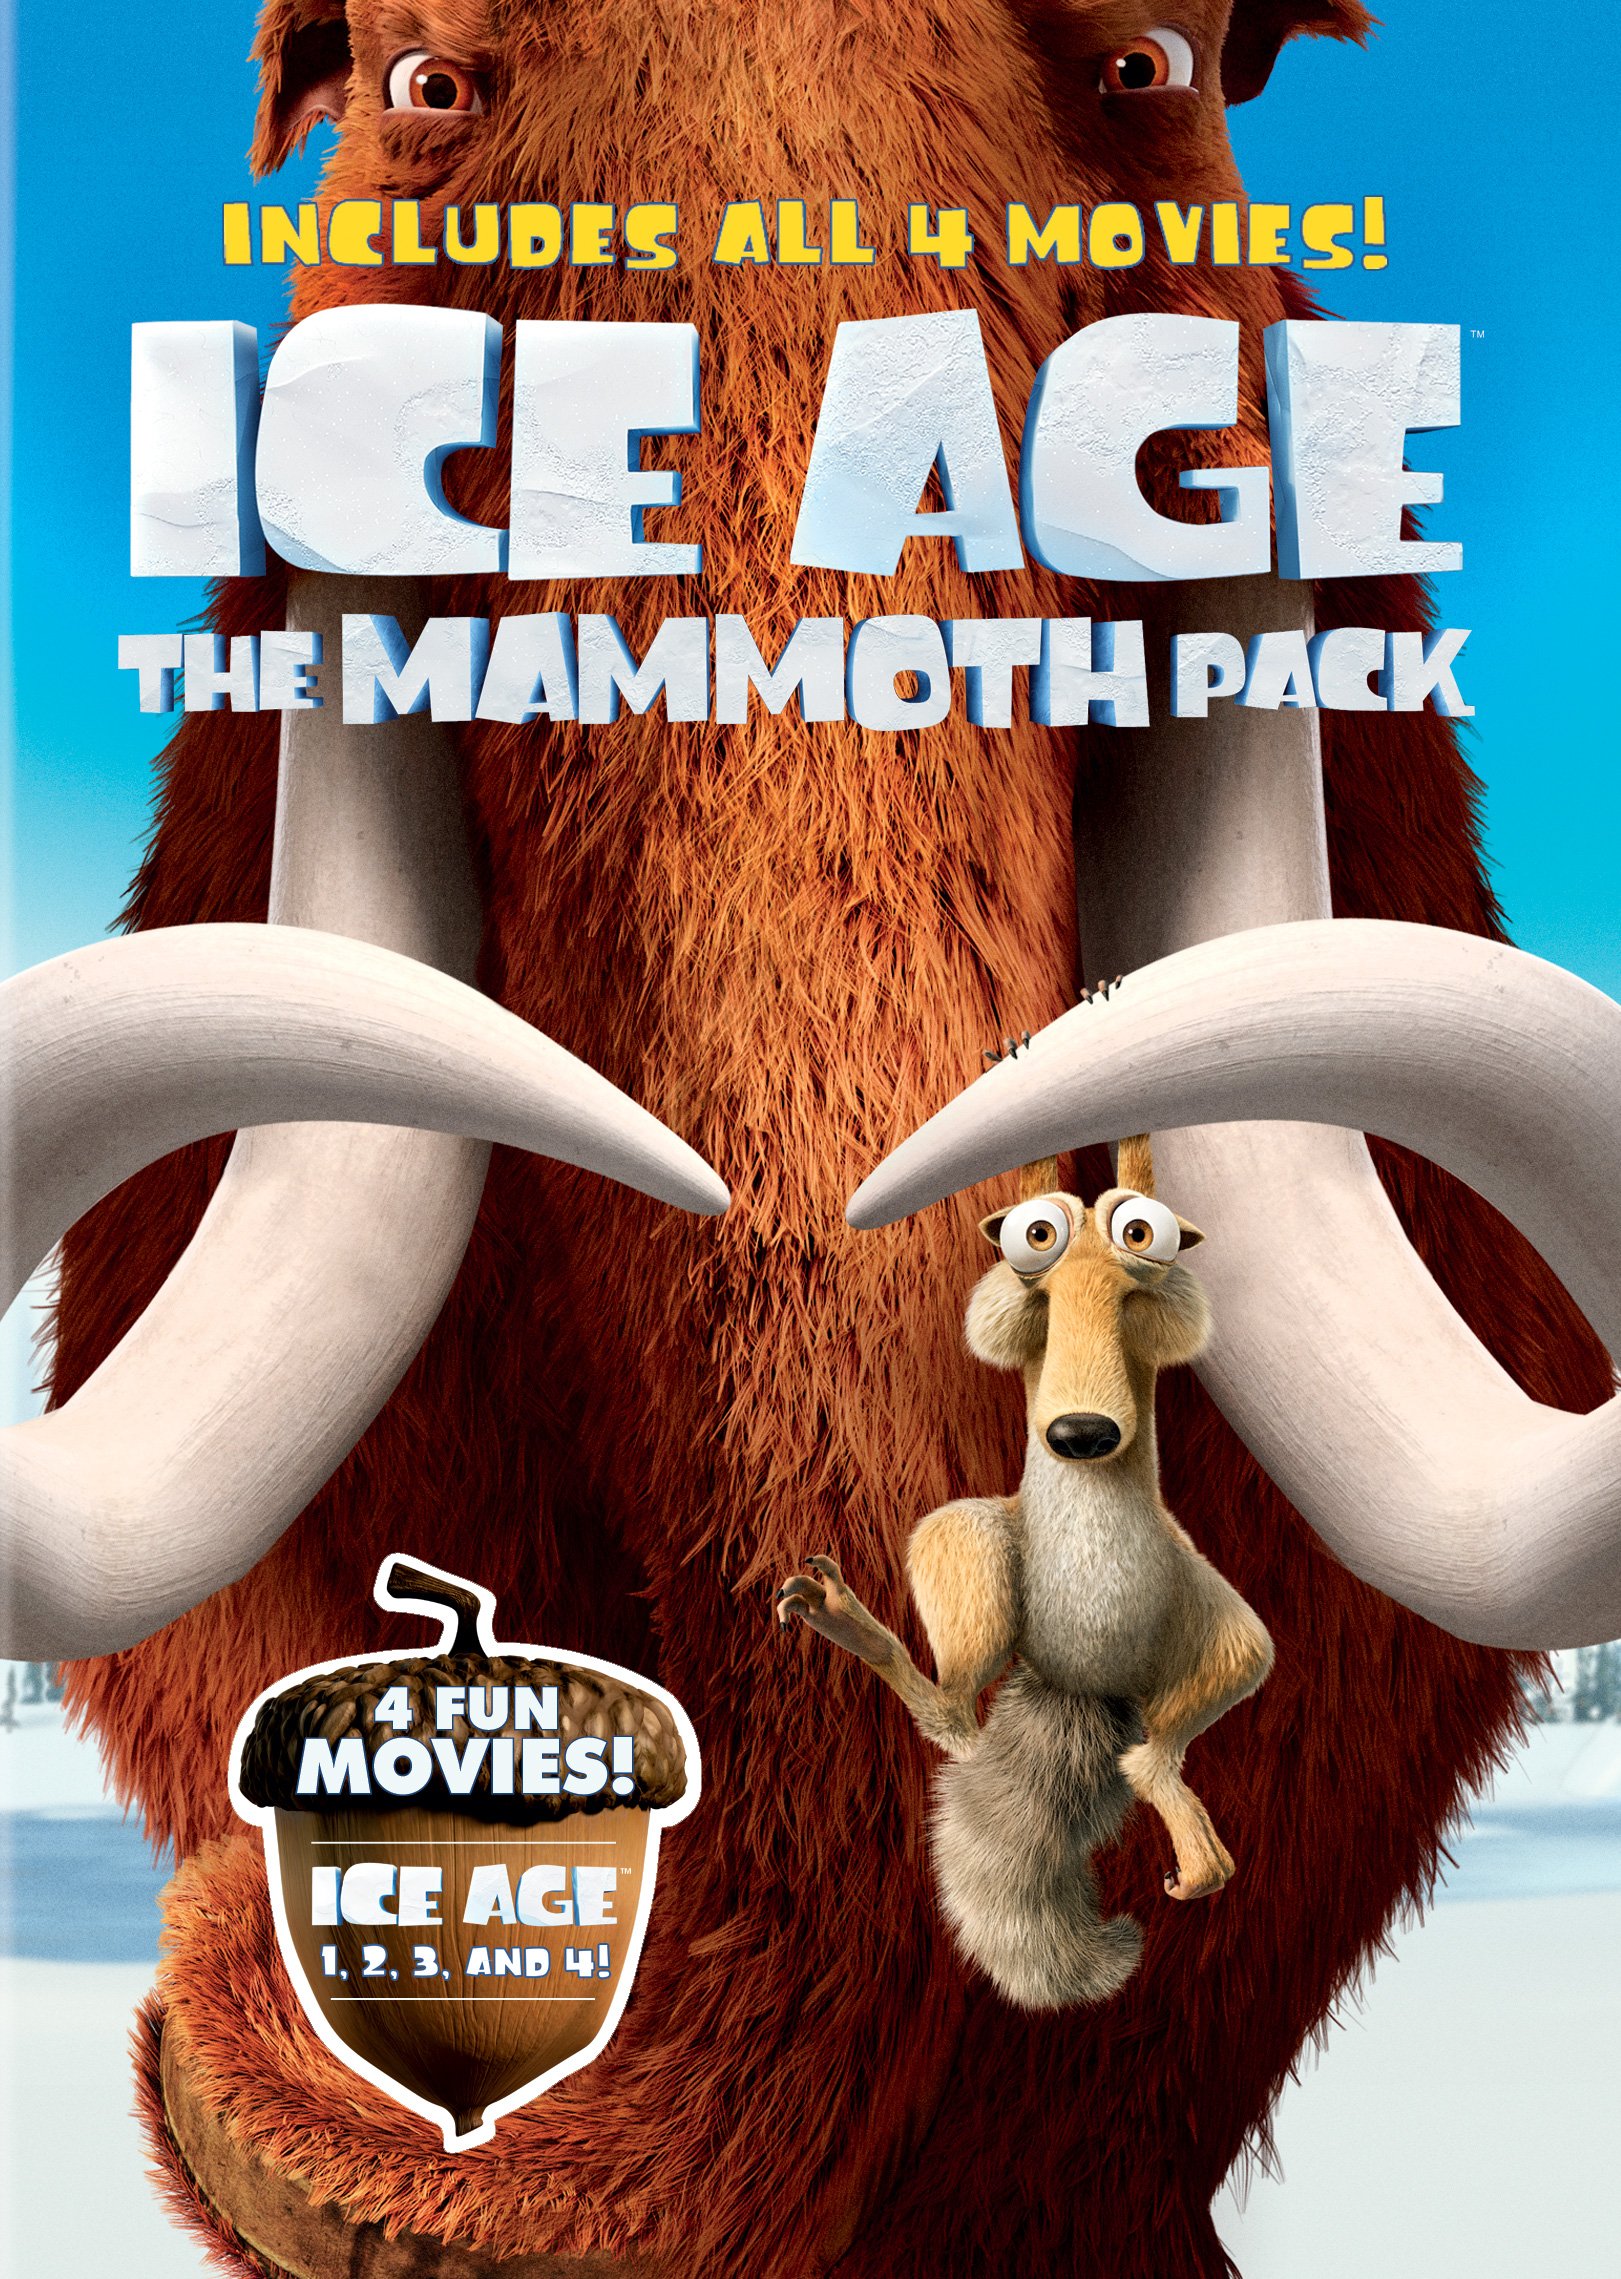 ice-age-the-mammoth-pack-4-movies-collection-ice-age-ice-age-2-the-meltdown-ice-age-3-dawn-of-dinosaurs-ice-age-4-continental-drift-4-disc-box-set